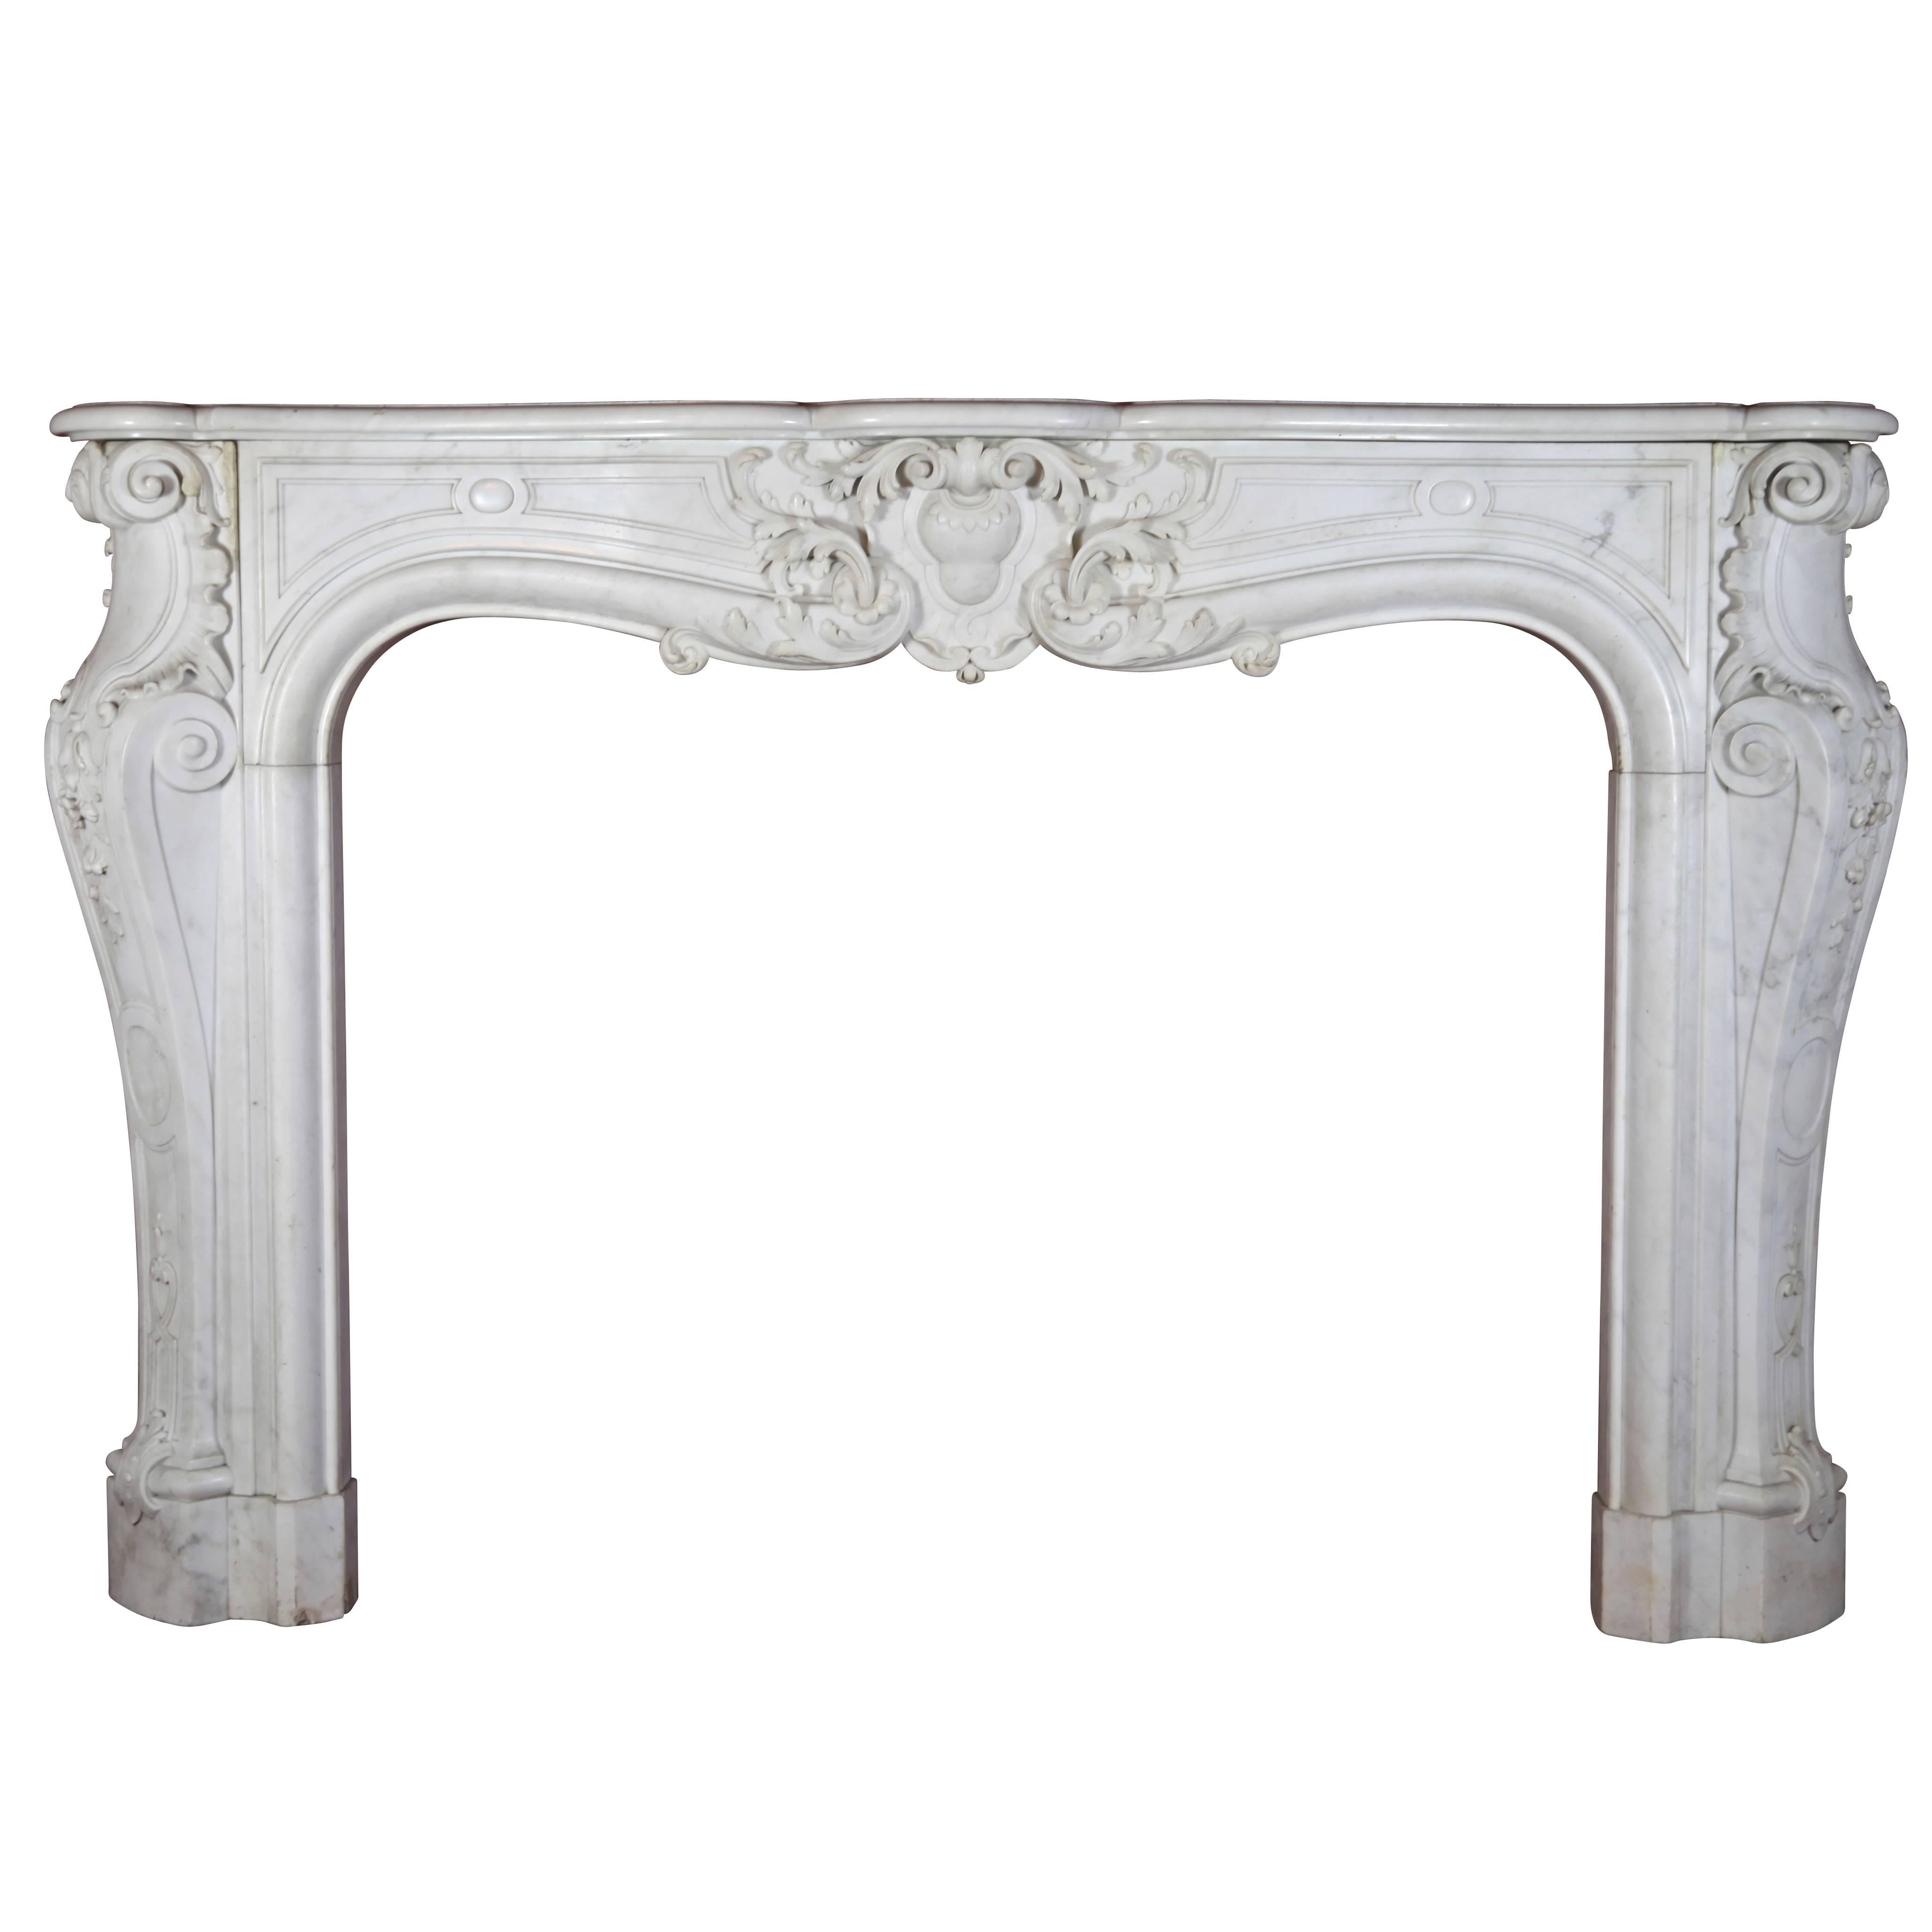 Grand White Statuary Marble Antique Fireplace Surround For Sale